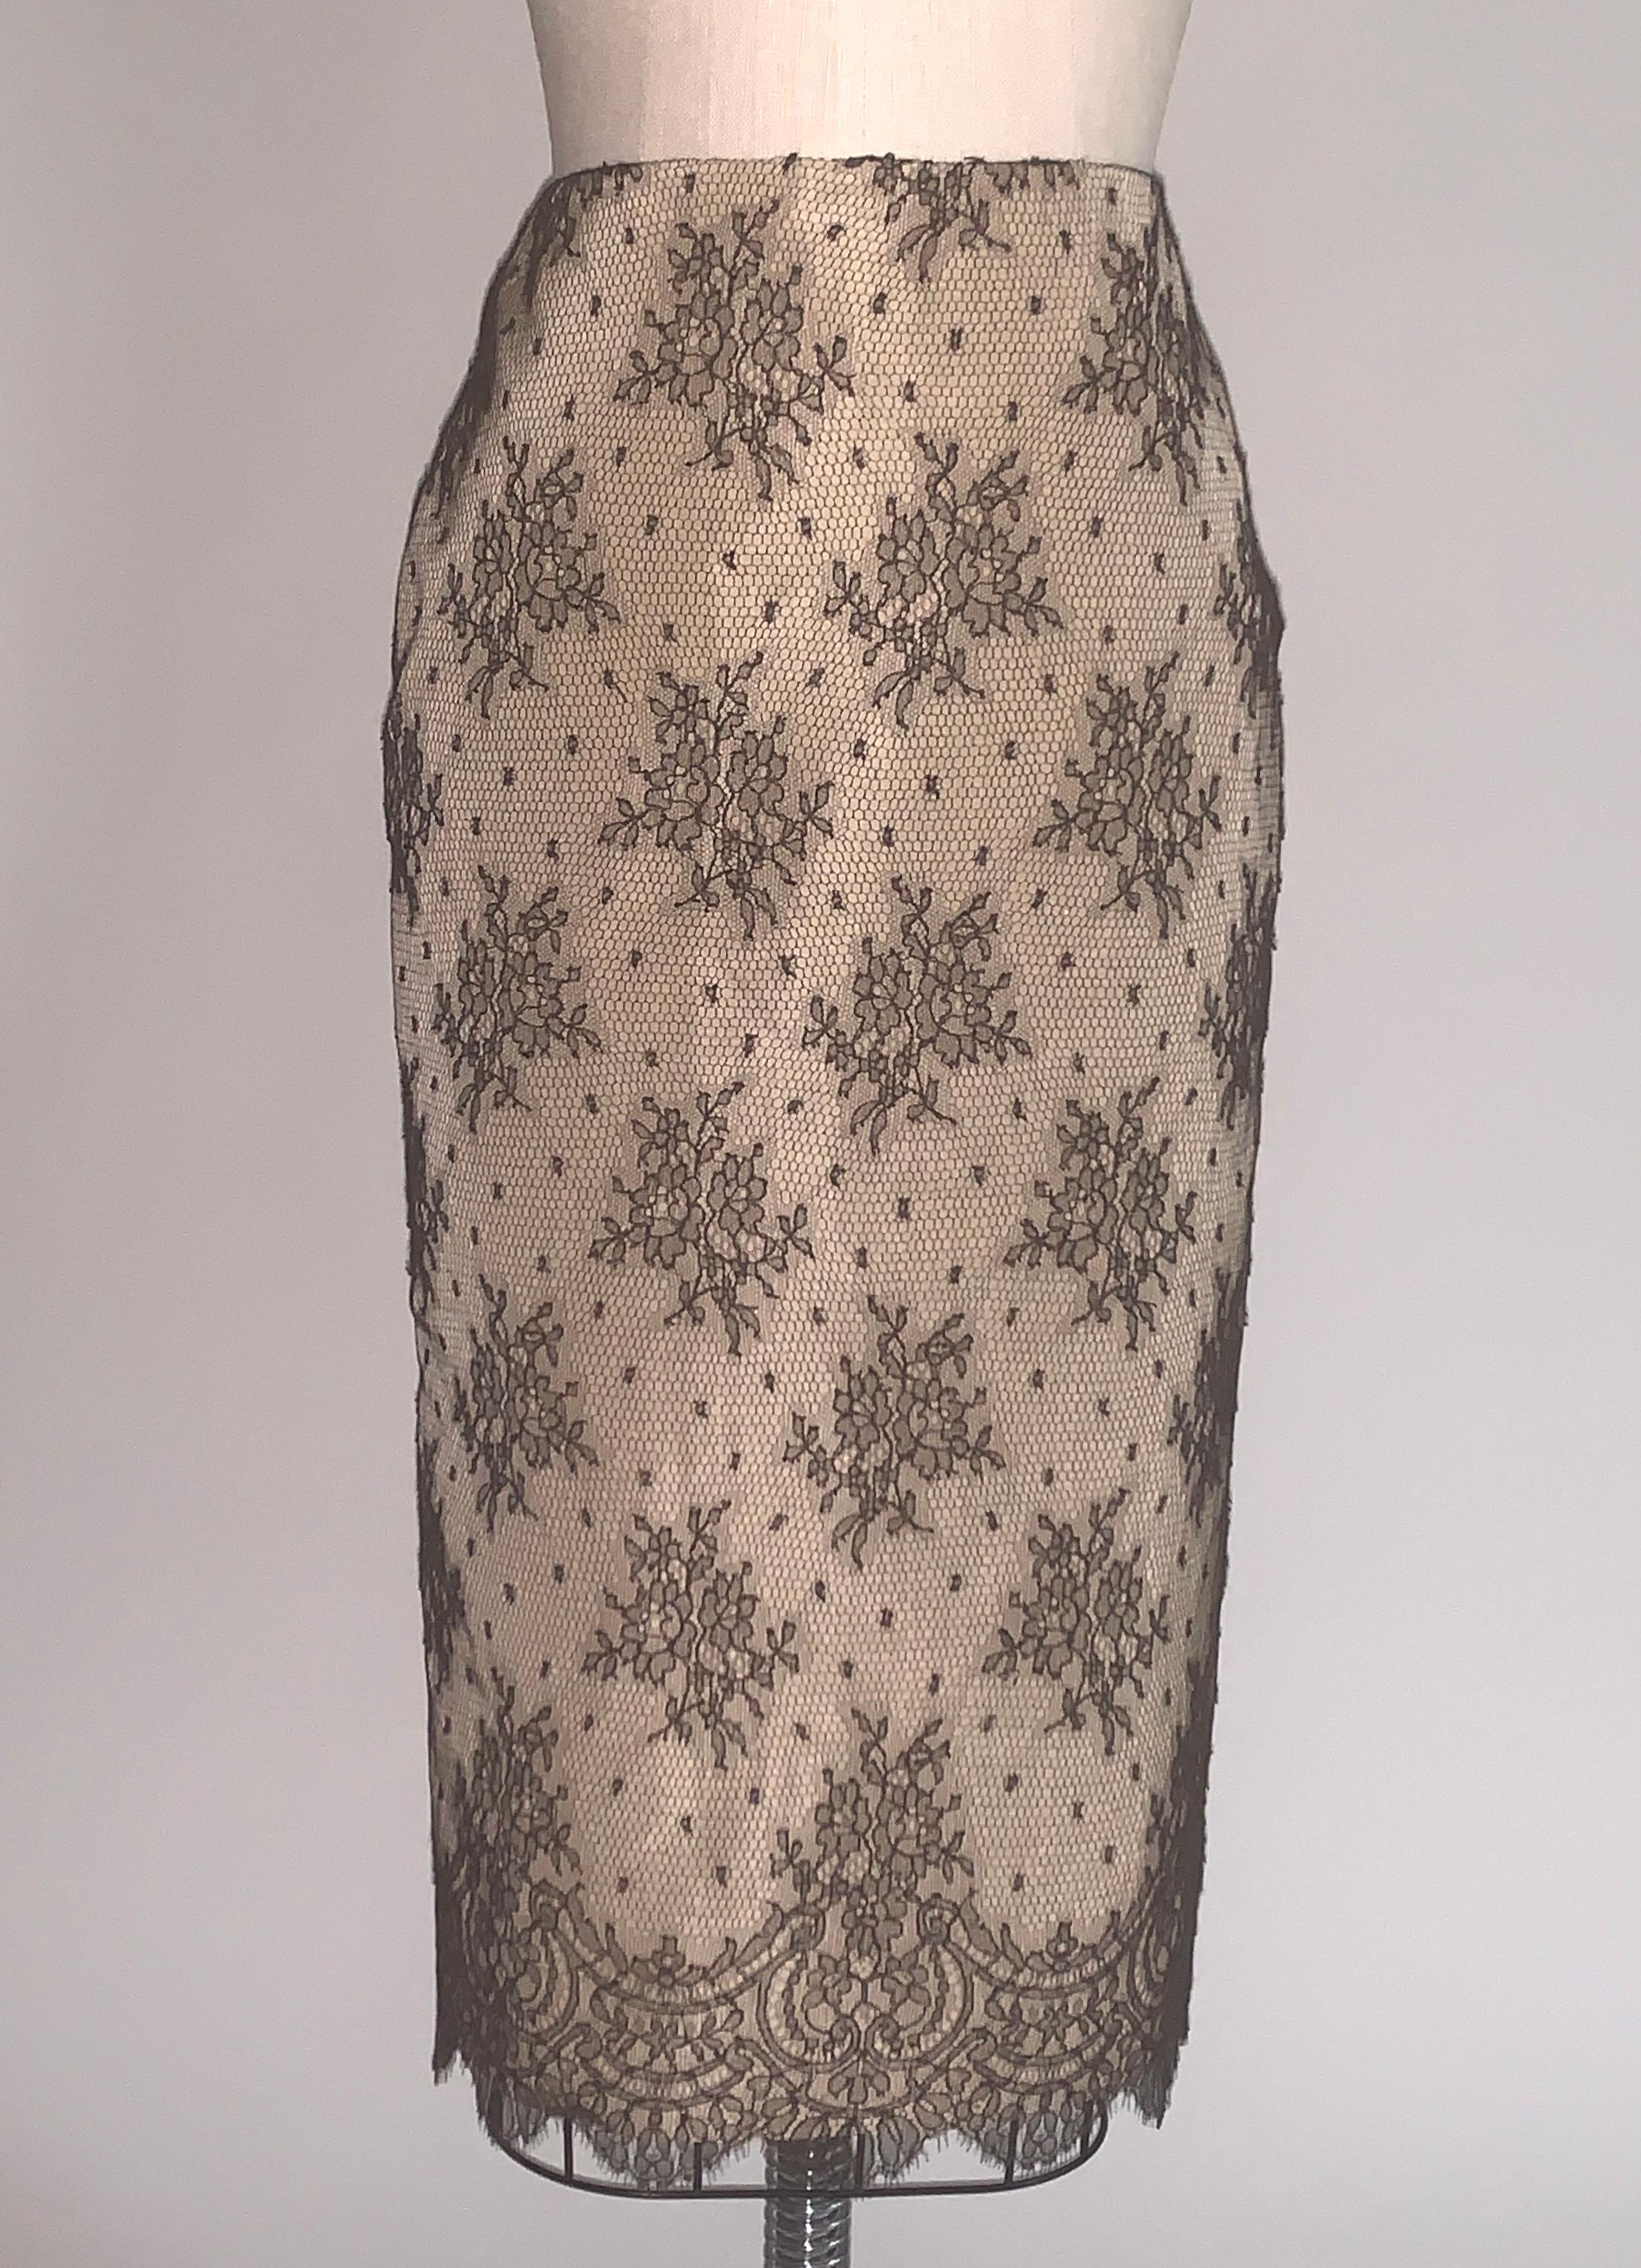 Alexander Mcqueen nude silk pencil skirt with black floral lace overlay from the 2005 